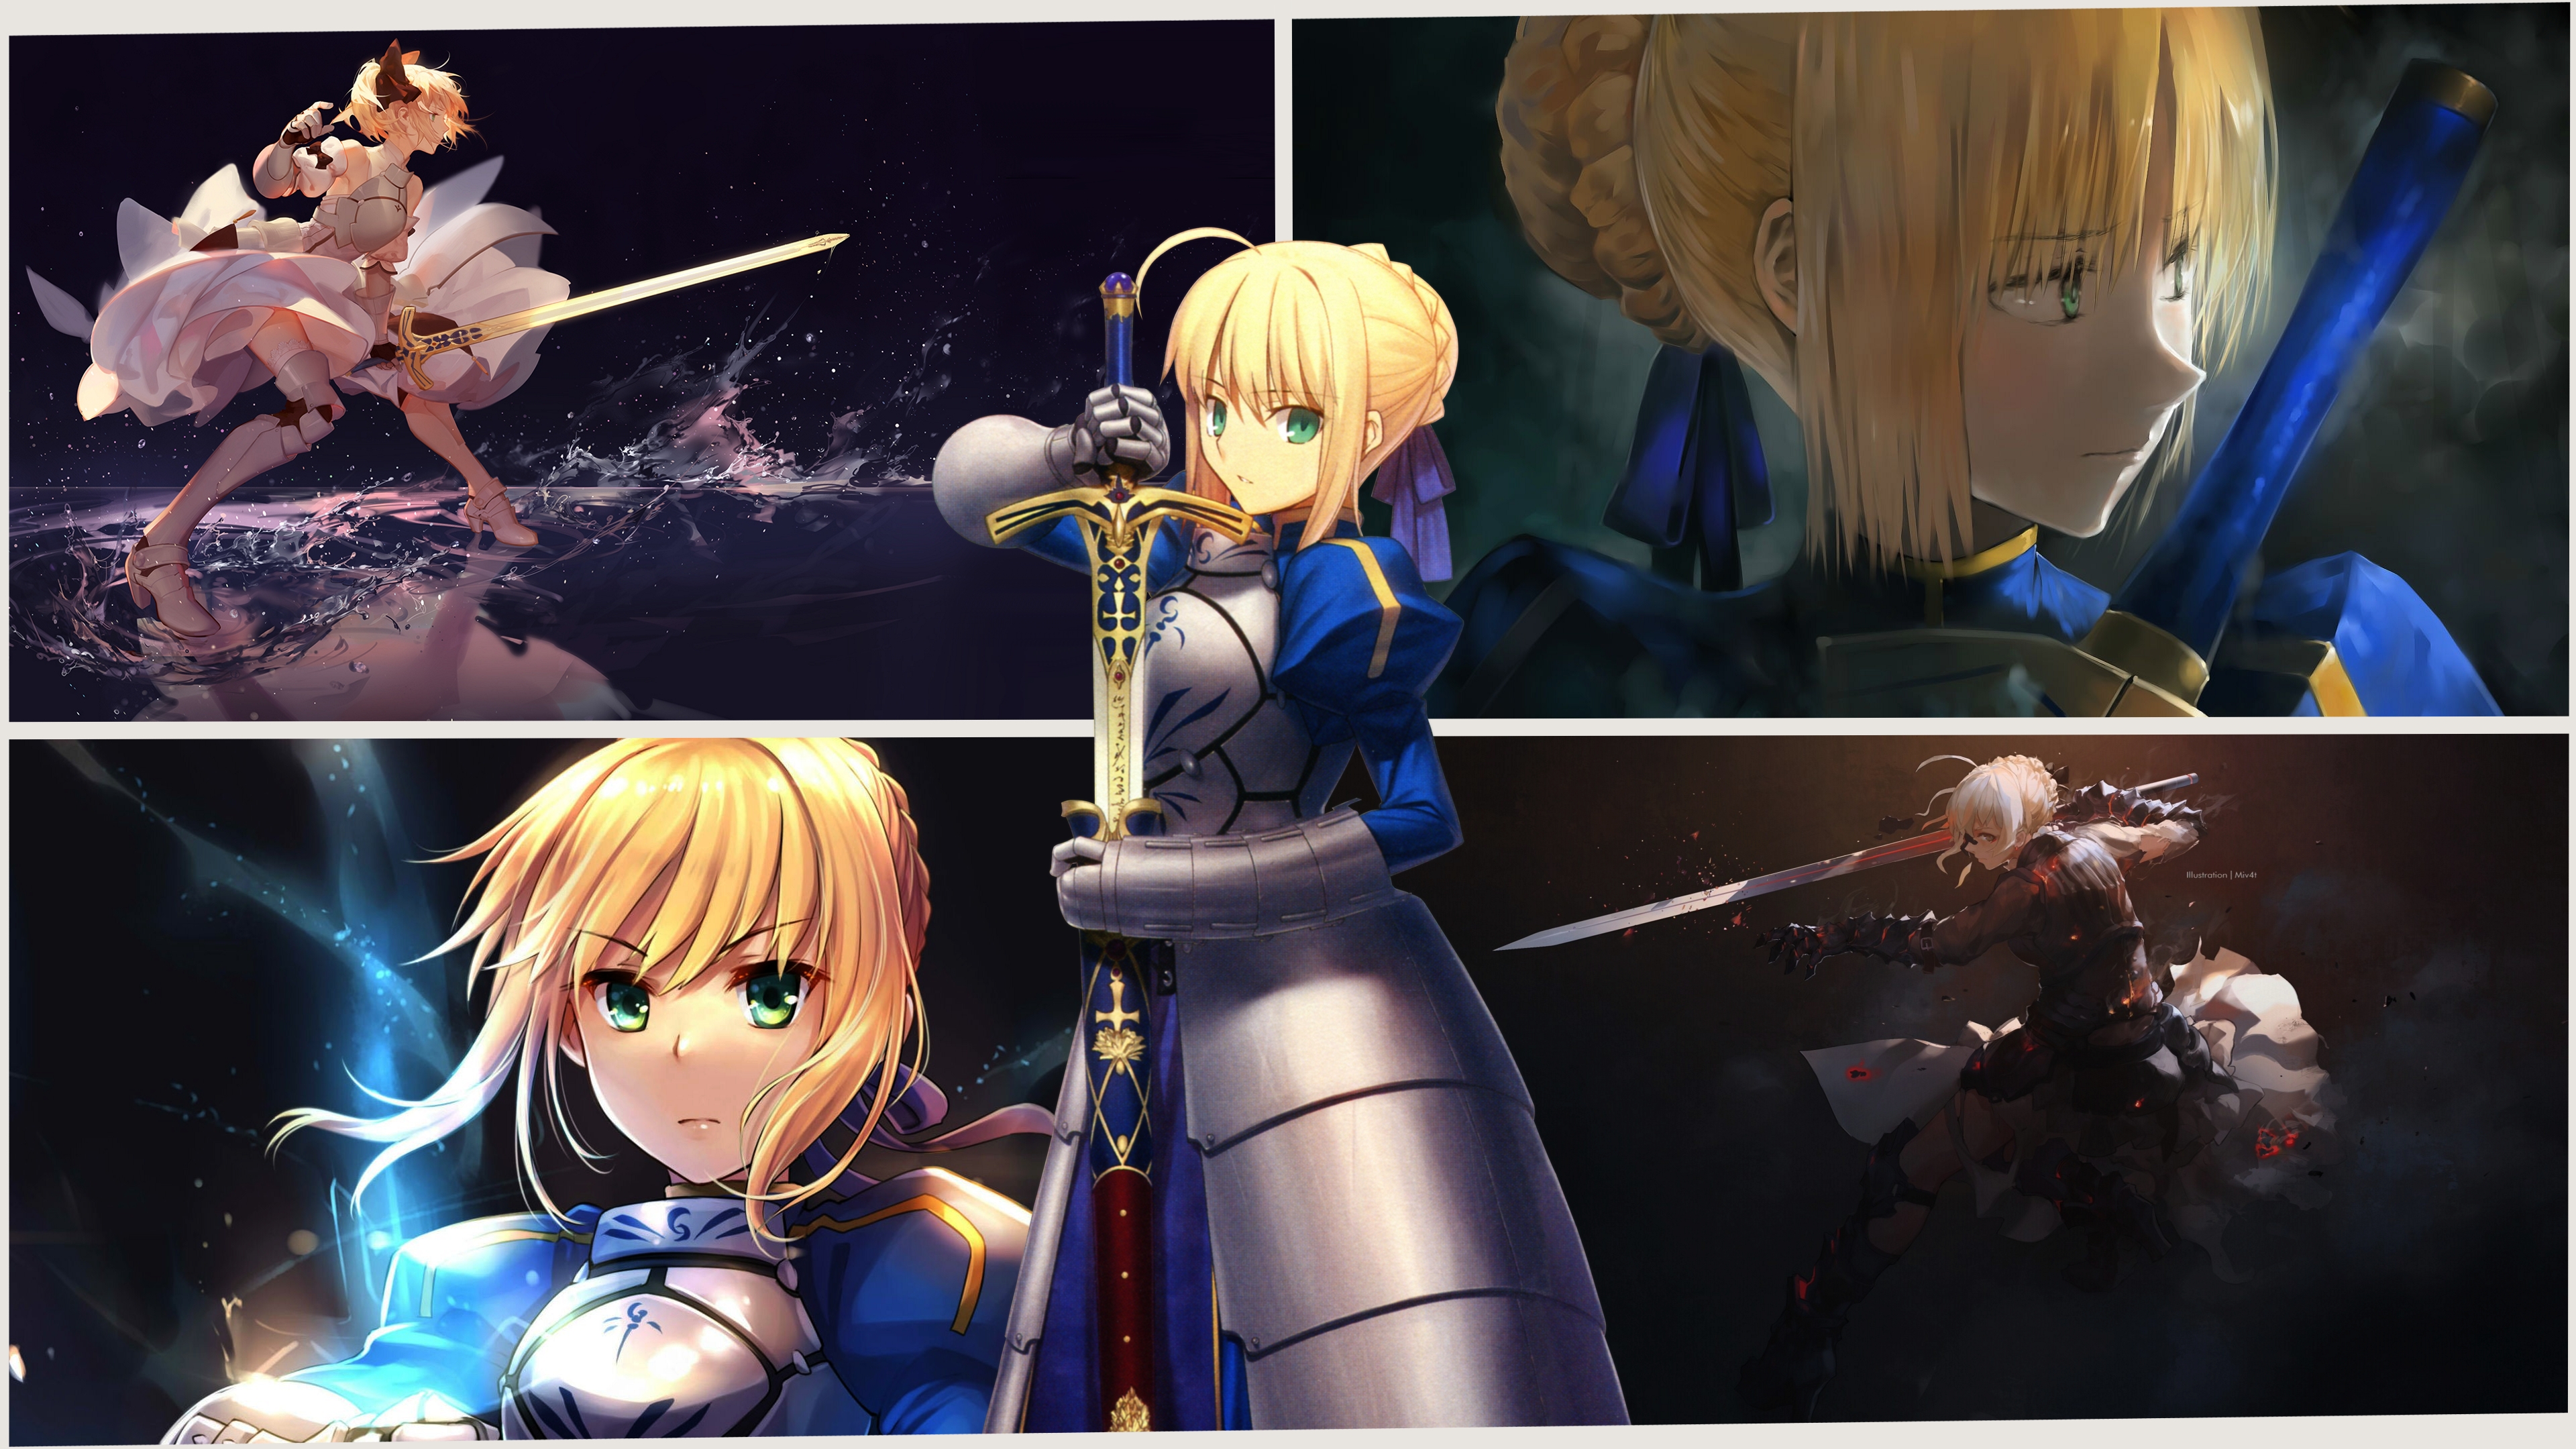 Anime 3840x2160 anime anime girls Fate series Fate/Stay Night Fate/Stay Night: Unlimited Blade Works Saber women with swords picture-in-picture artwork